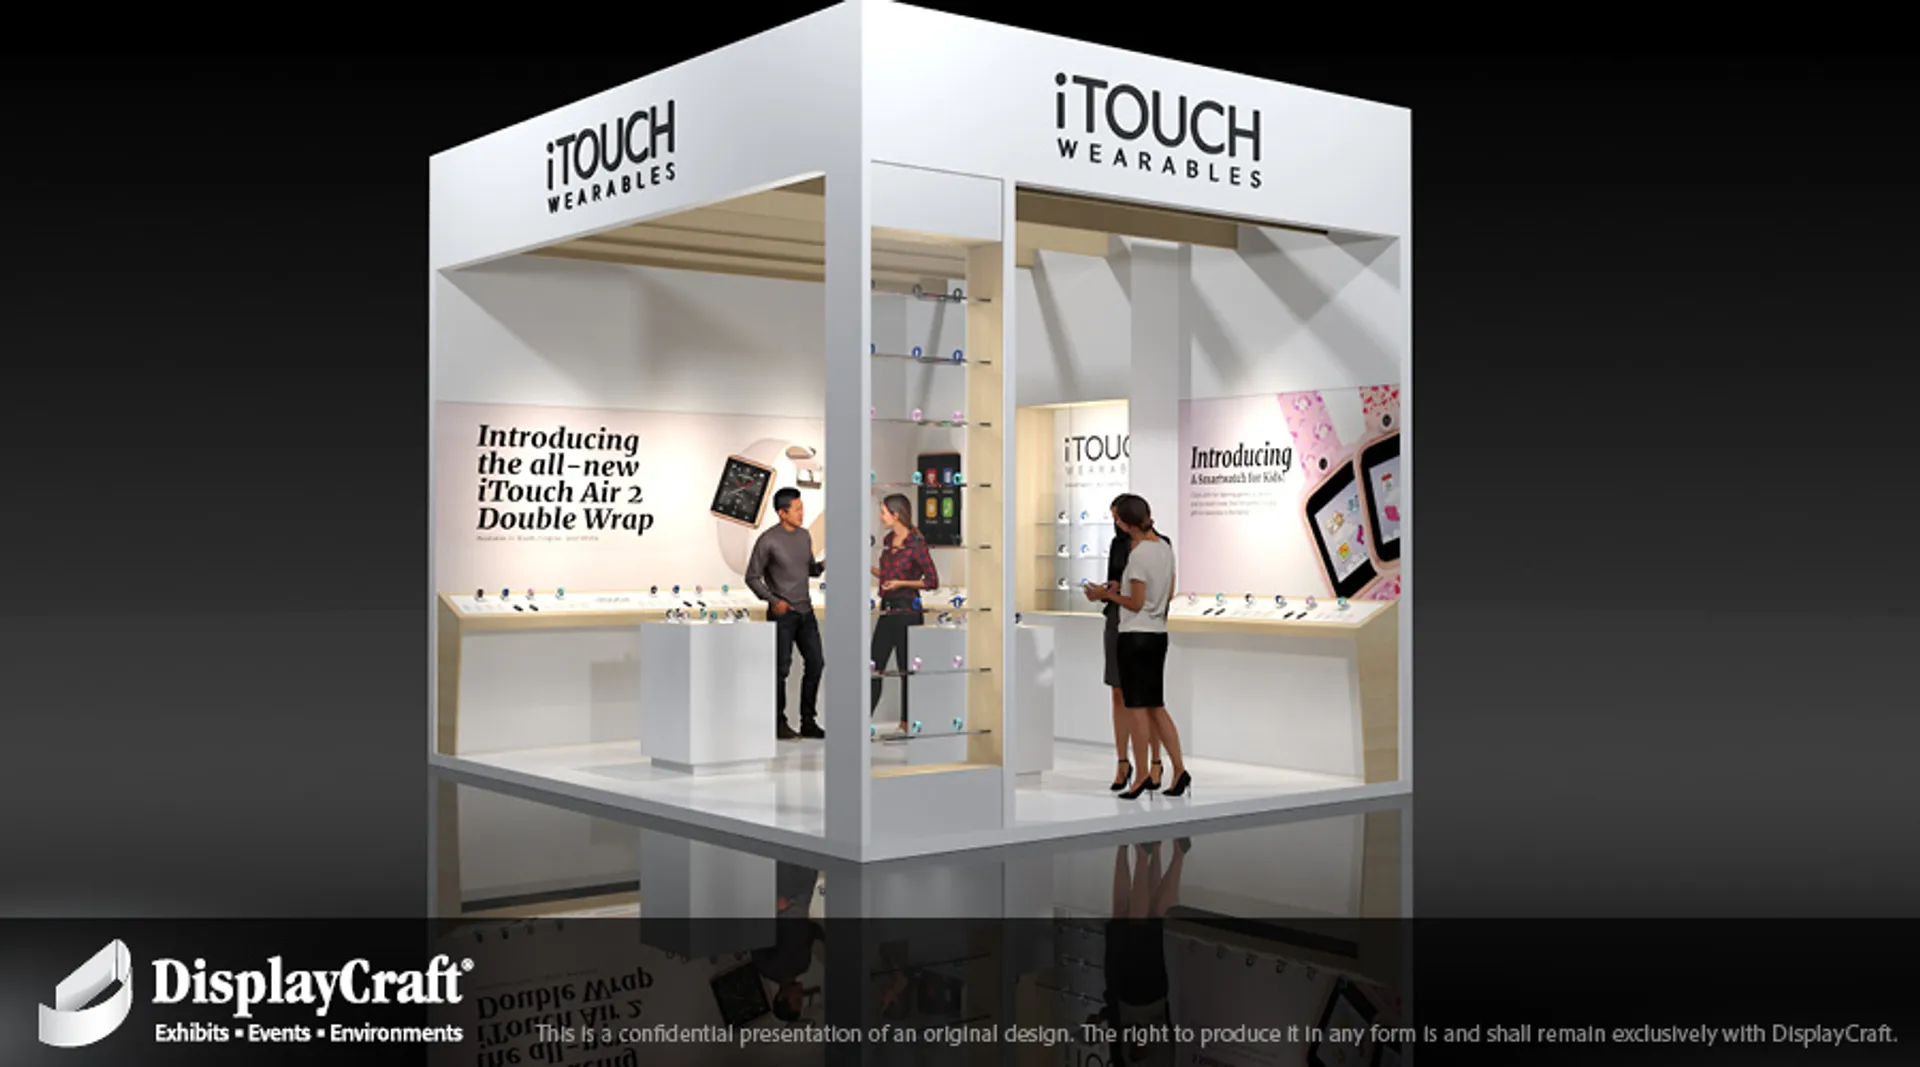 booth-design-projects/DisplayCraft/2024-04-03-20x20-PERIMETER-Project-69/iTouch 1-fted6b.jpg